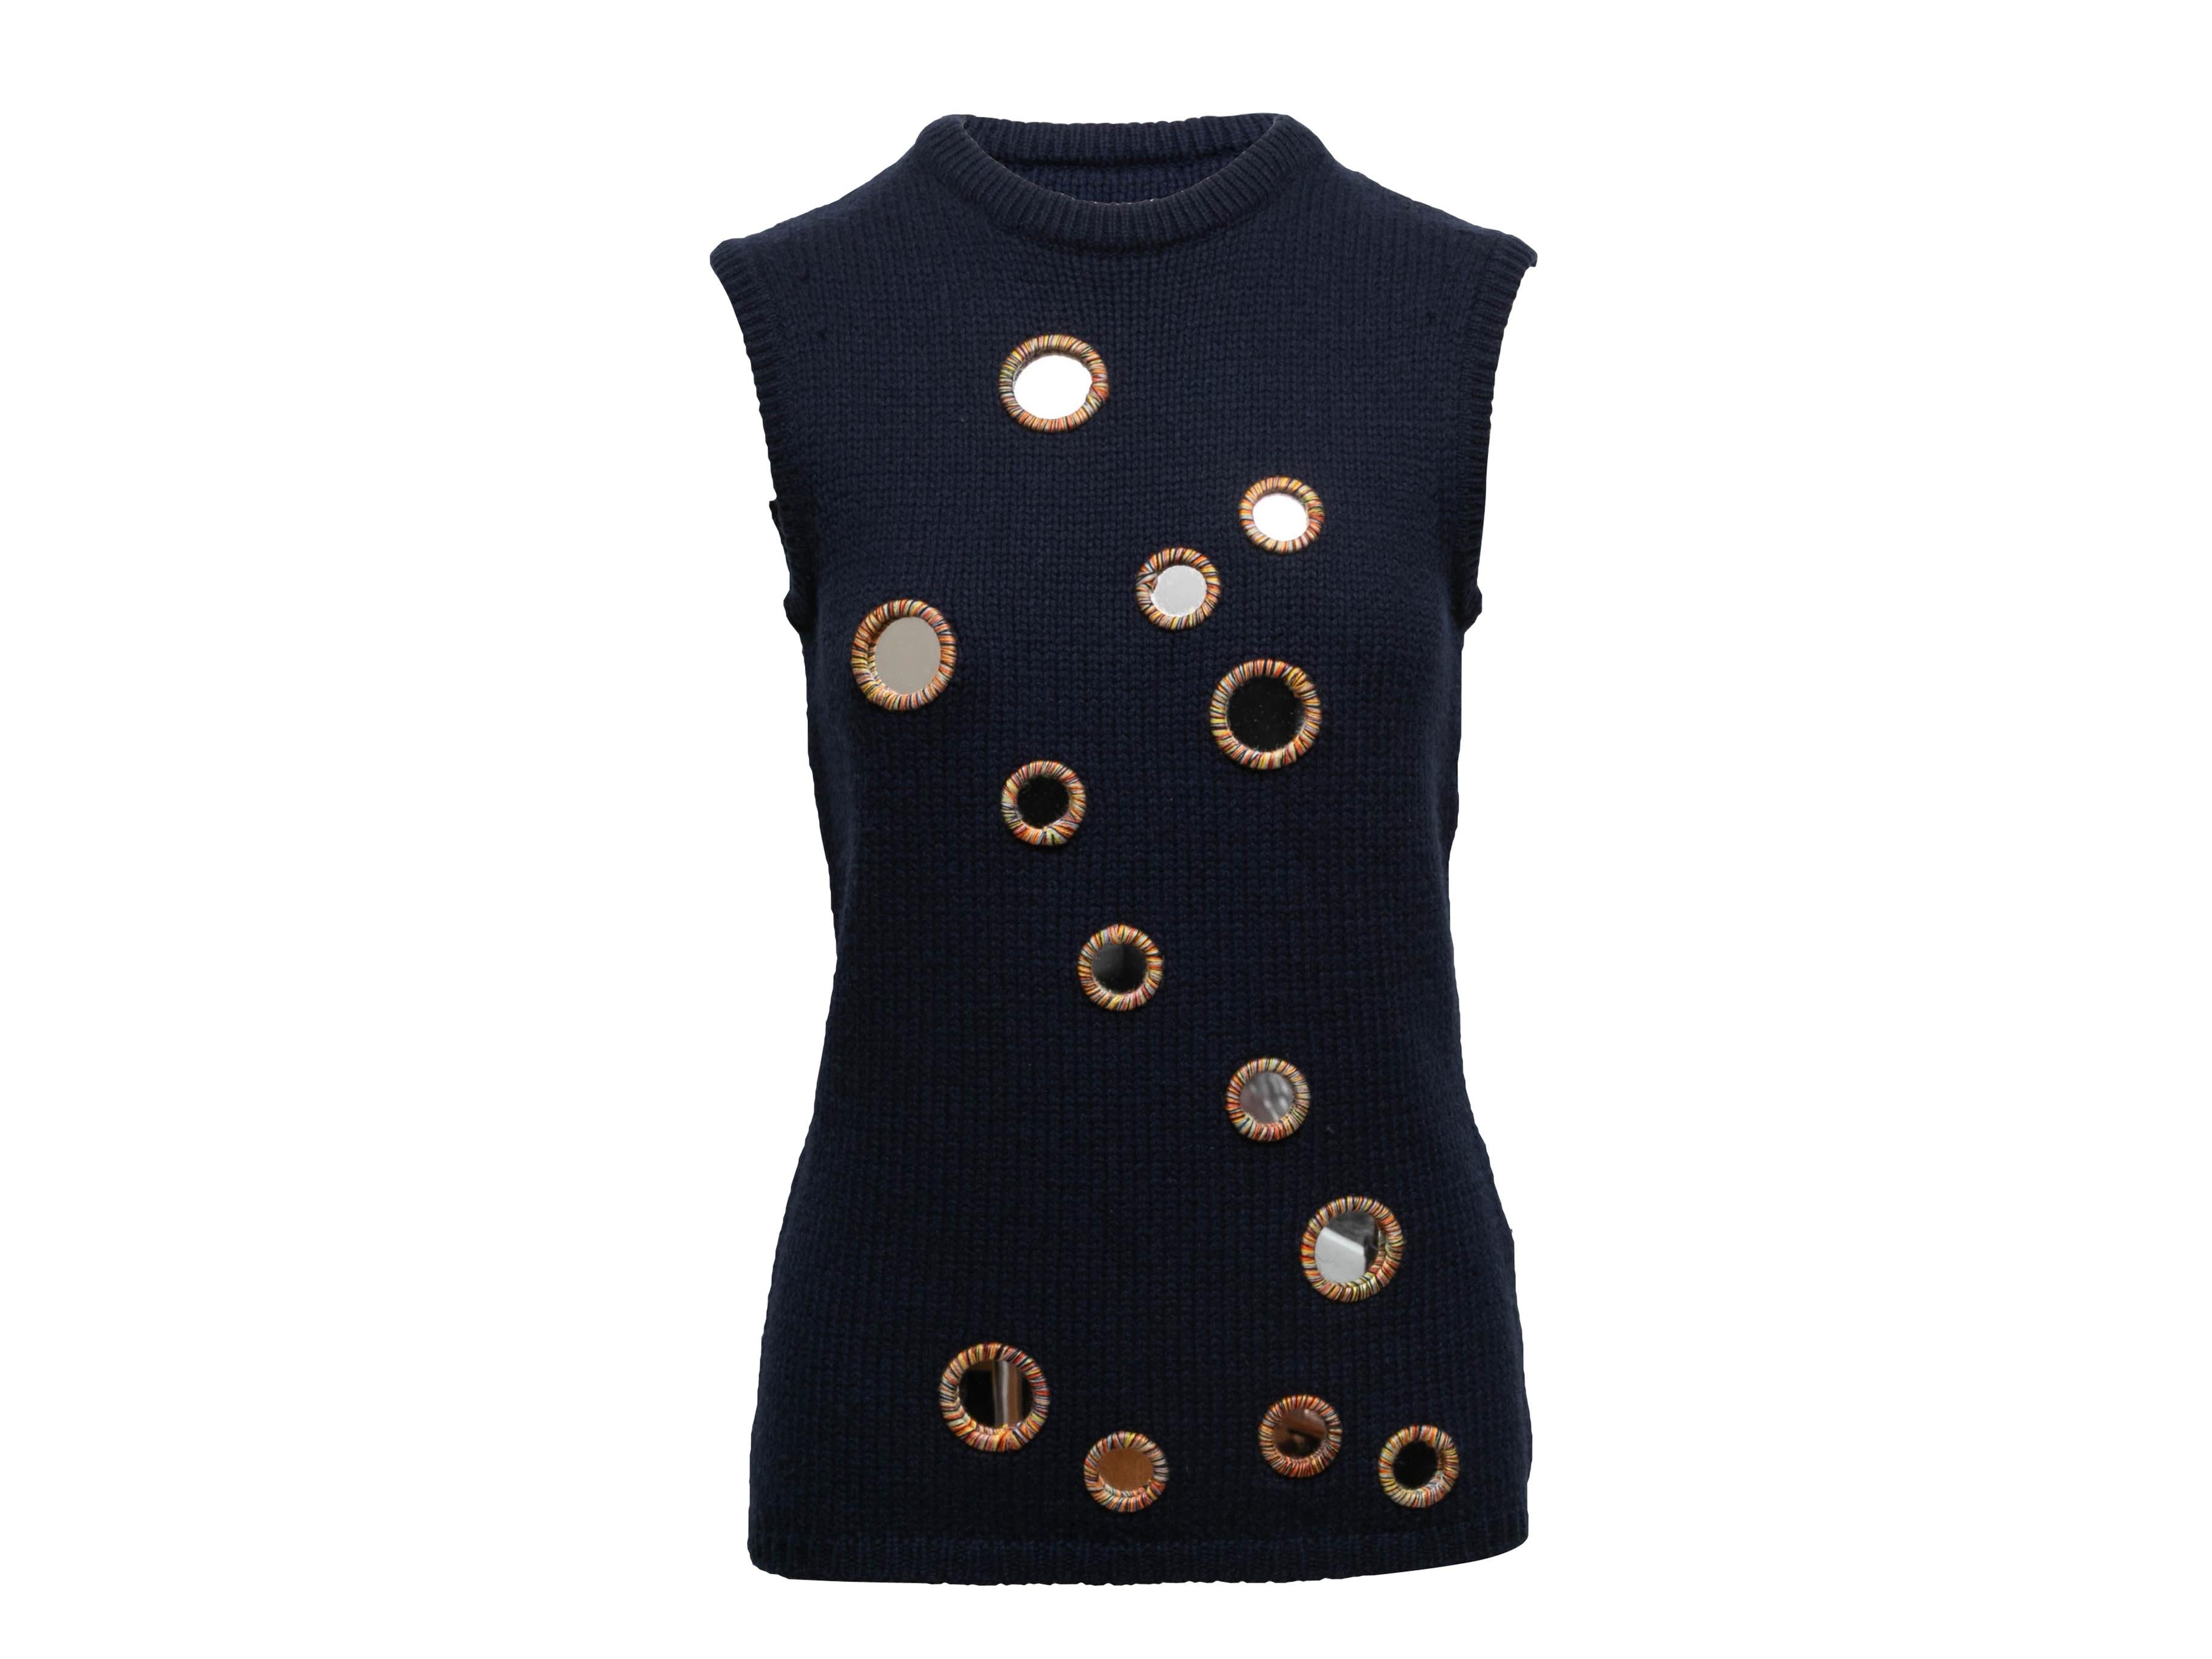 Navy wool-blend knit sleeveless top by JW Anderson. Round mirror accents throughout front. Crew neck. 33